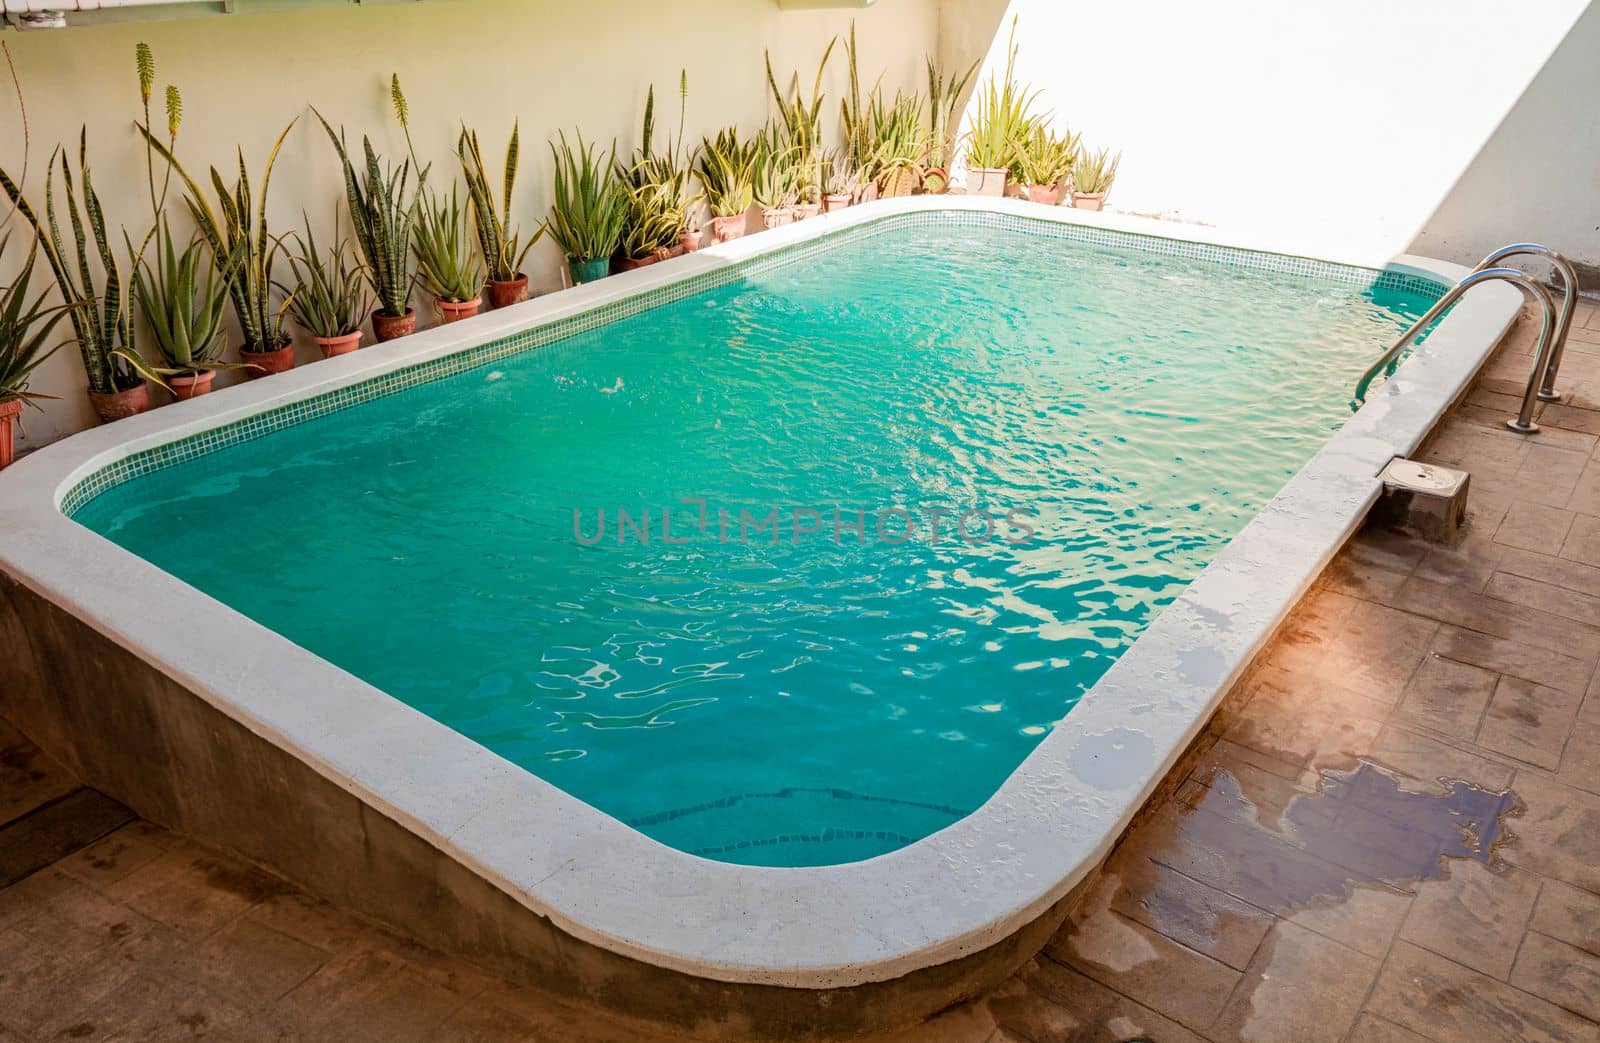 Beautiful home swimming pool with crystal clear waters. Crystal clear home swimming pool on a sunny day, Concept of home swimming pool designs